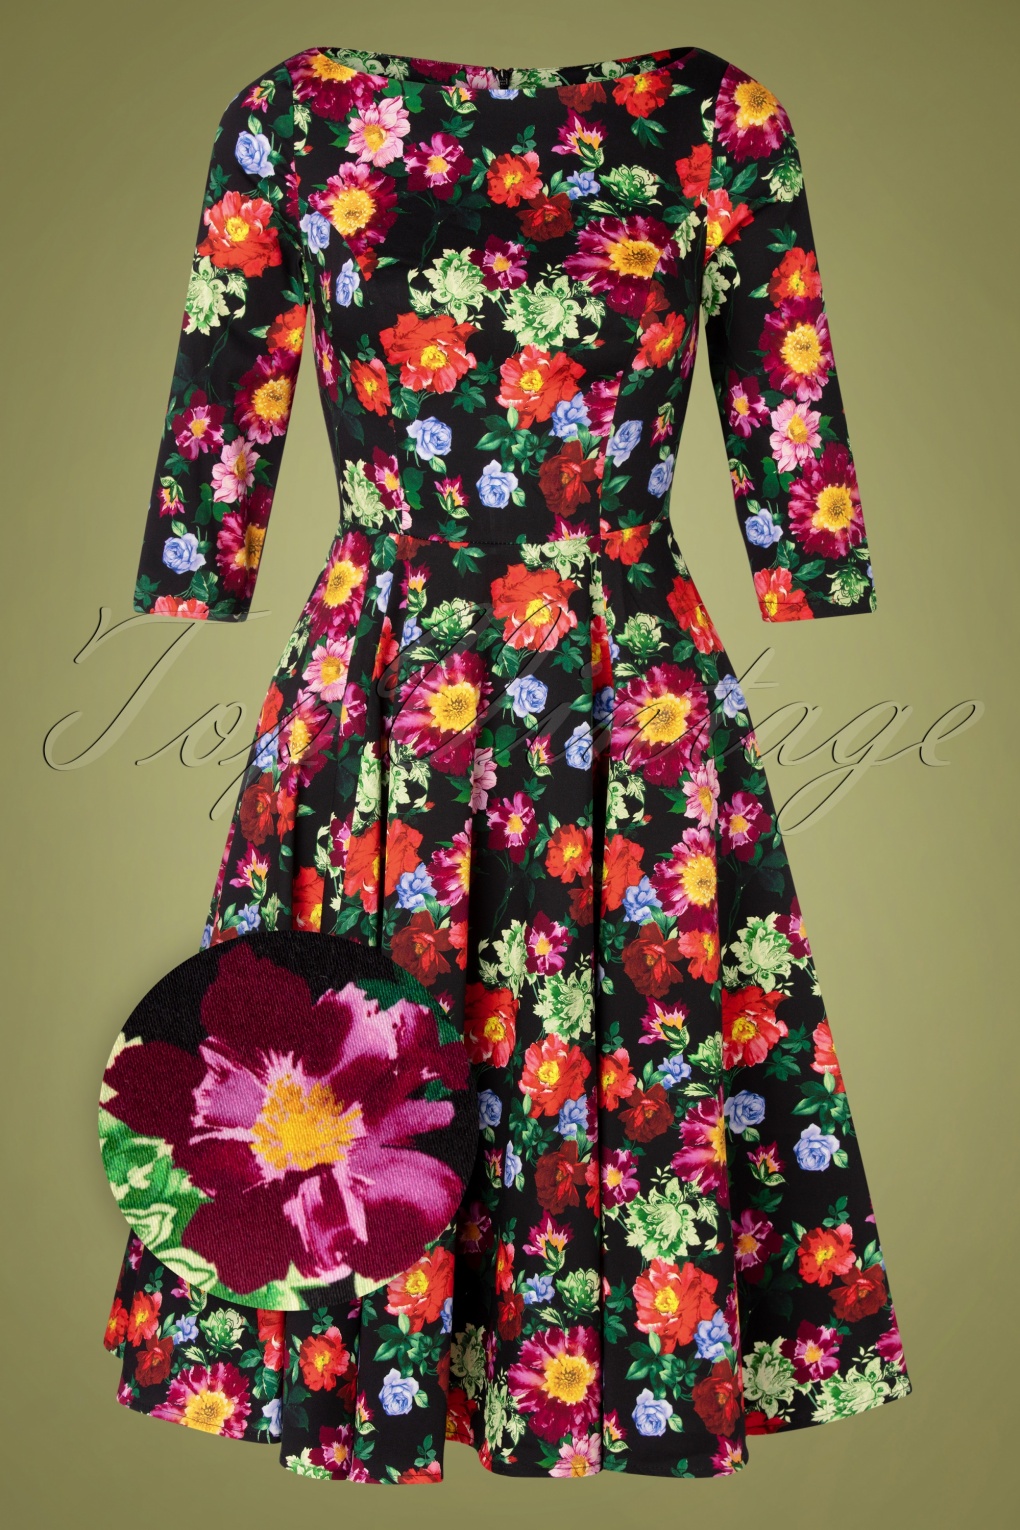 50s Jessica Floral Swing Dress in Black